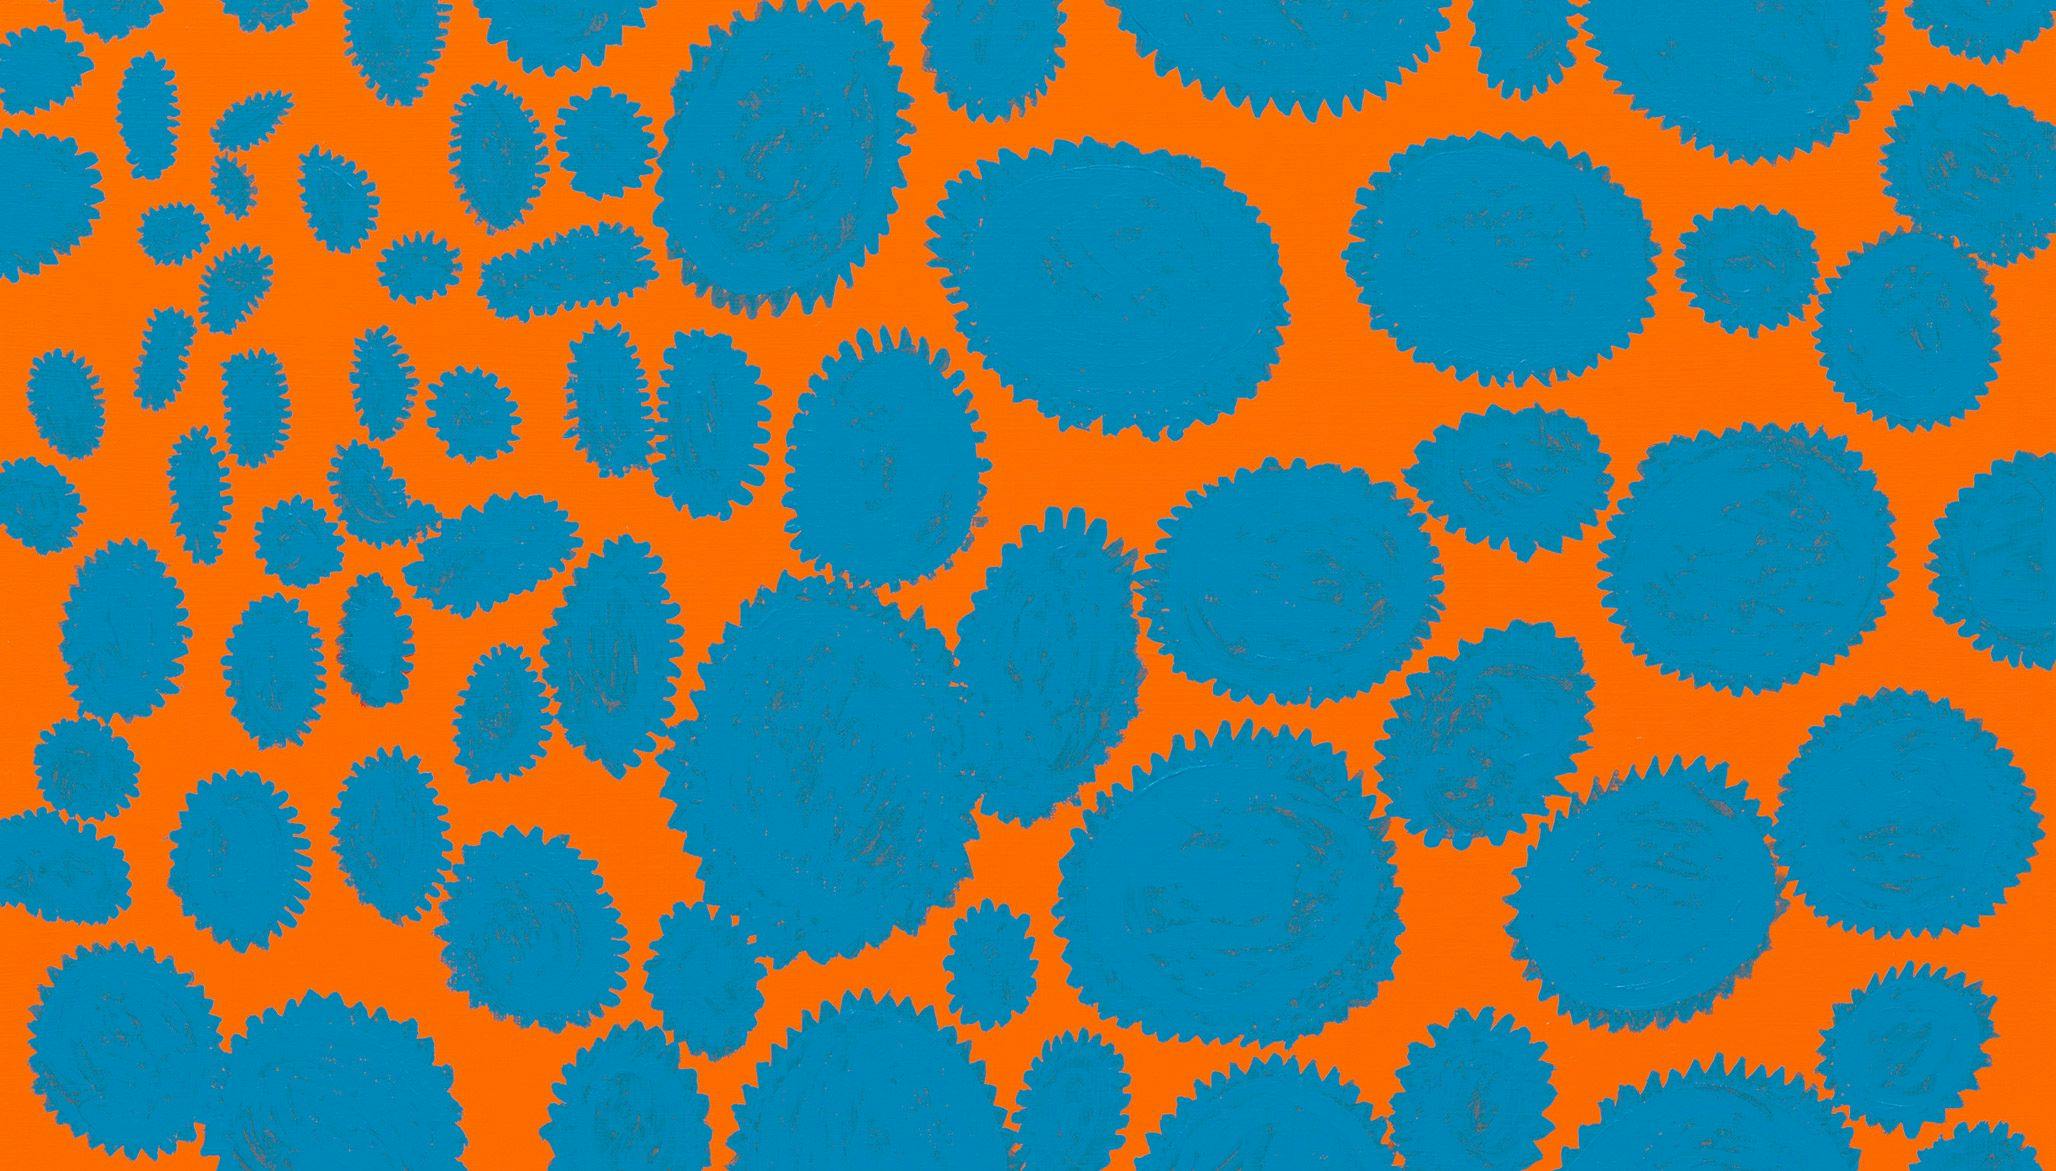 A detail from a painting by Yayoi Kusama, titled SPLENDOR OF STARS CHANGING INTO BLUE, dated 2019.